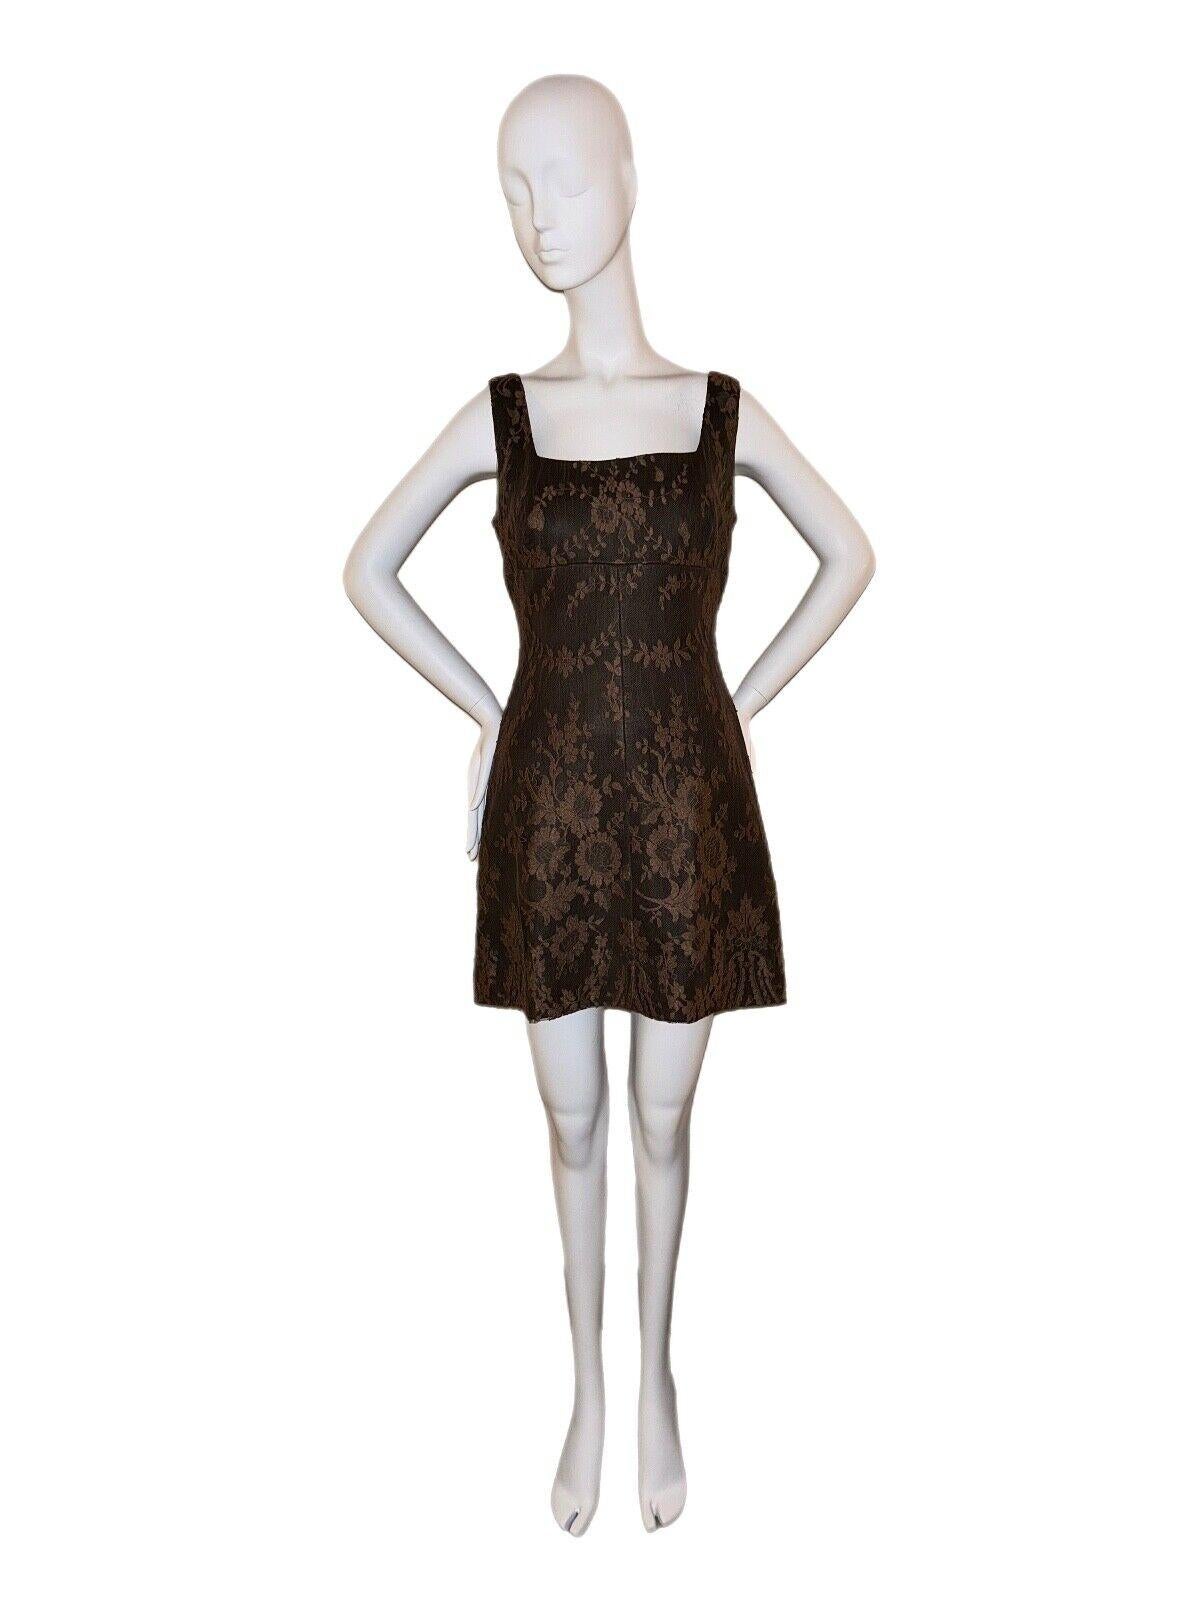 Gianni Versace
FW96
Vintage
Chocolate Brown lace + leather
IT42 
Excellent condition, minor feeling of wear
Measurements laying flat across in inches: pit to pit 15.5, length 34, waist 14
The body is 100% leather and the overlay is lace

ALL SALES